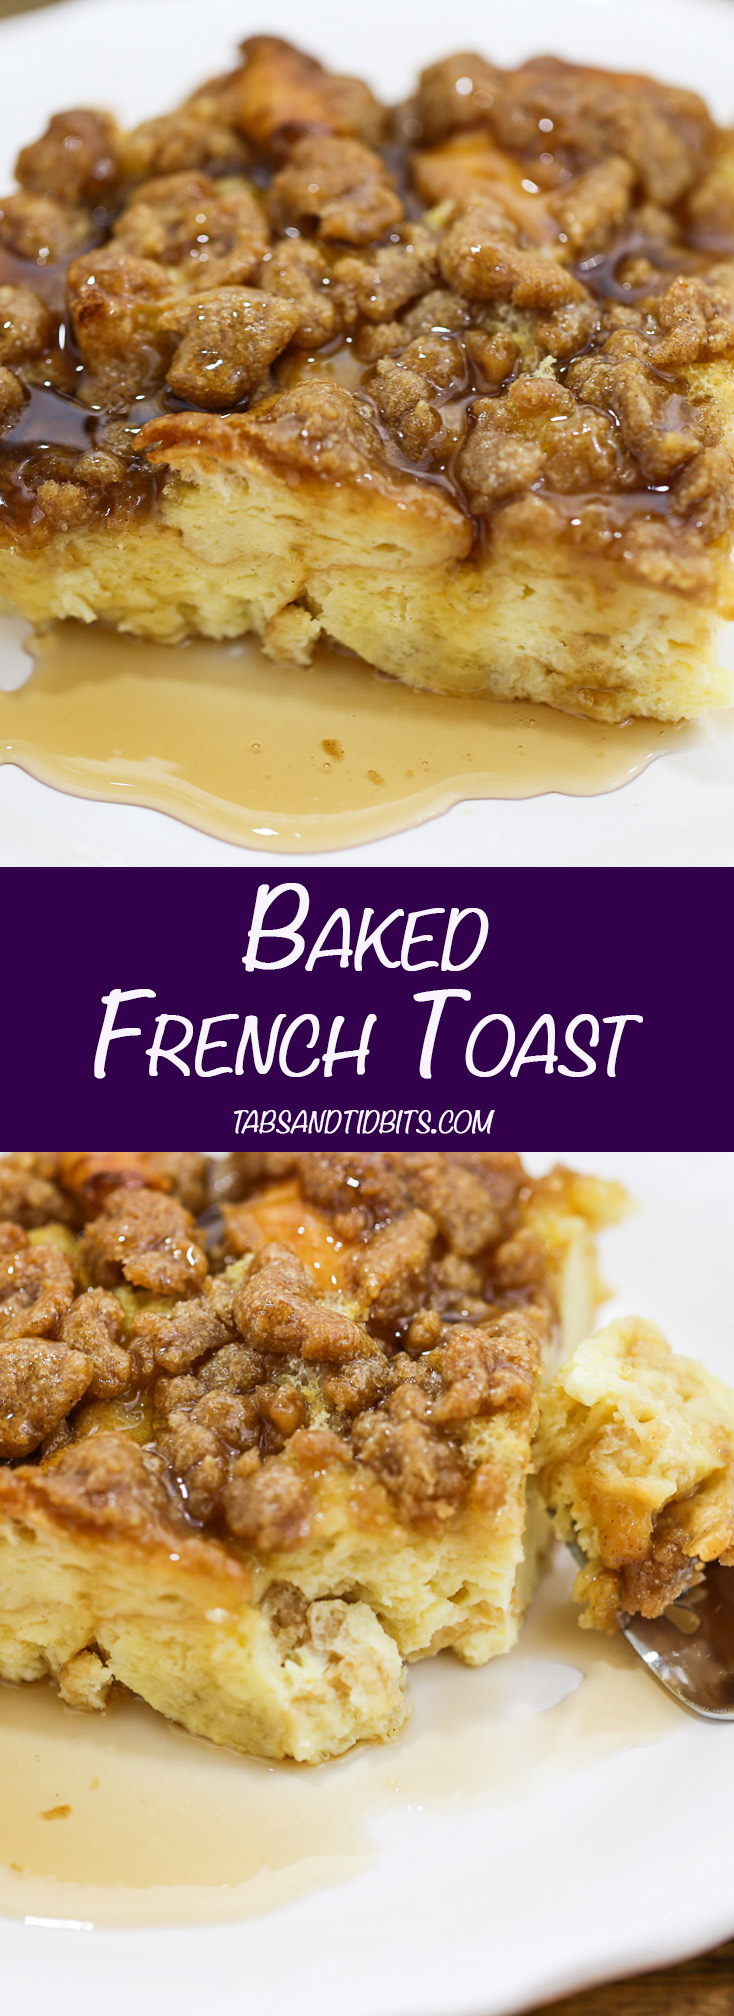 Baked French Toast - Cinnamon French Toast meets bread pudding with easy prep.